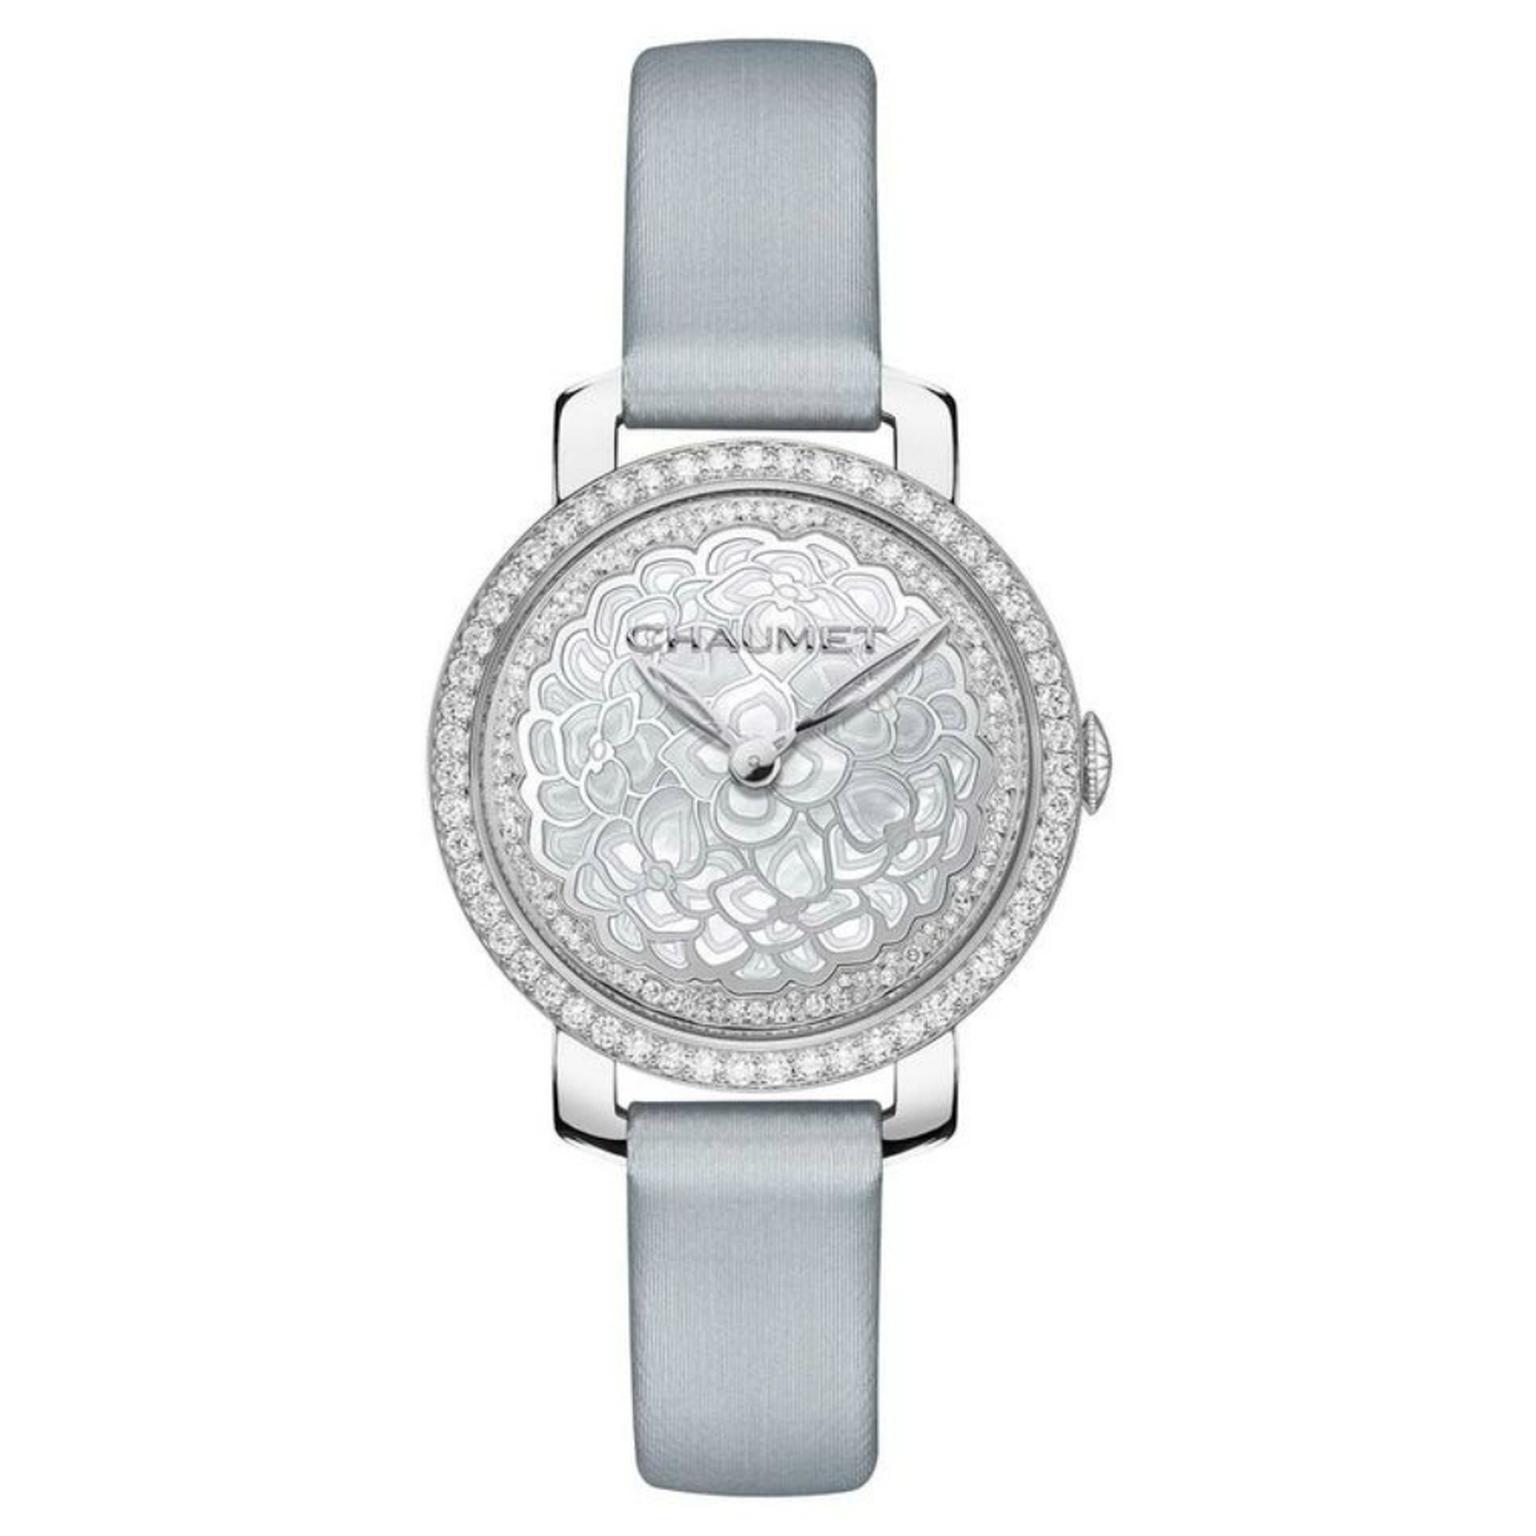 Chaumet Hortensia watch with a mother-of-pearl dial